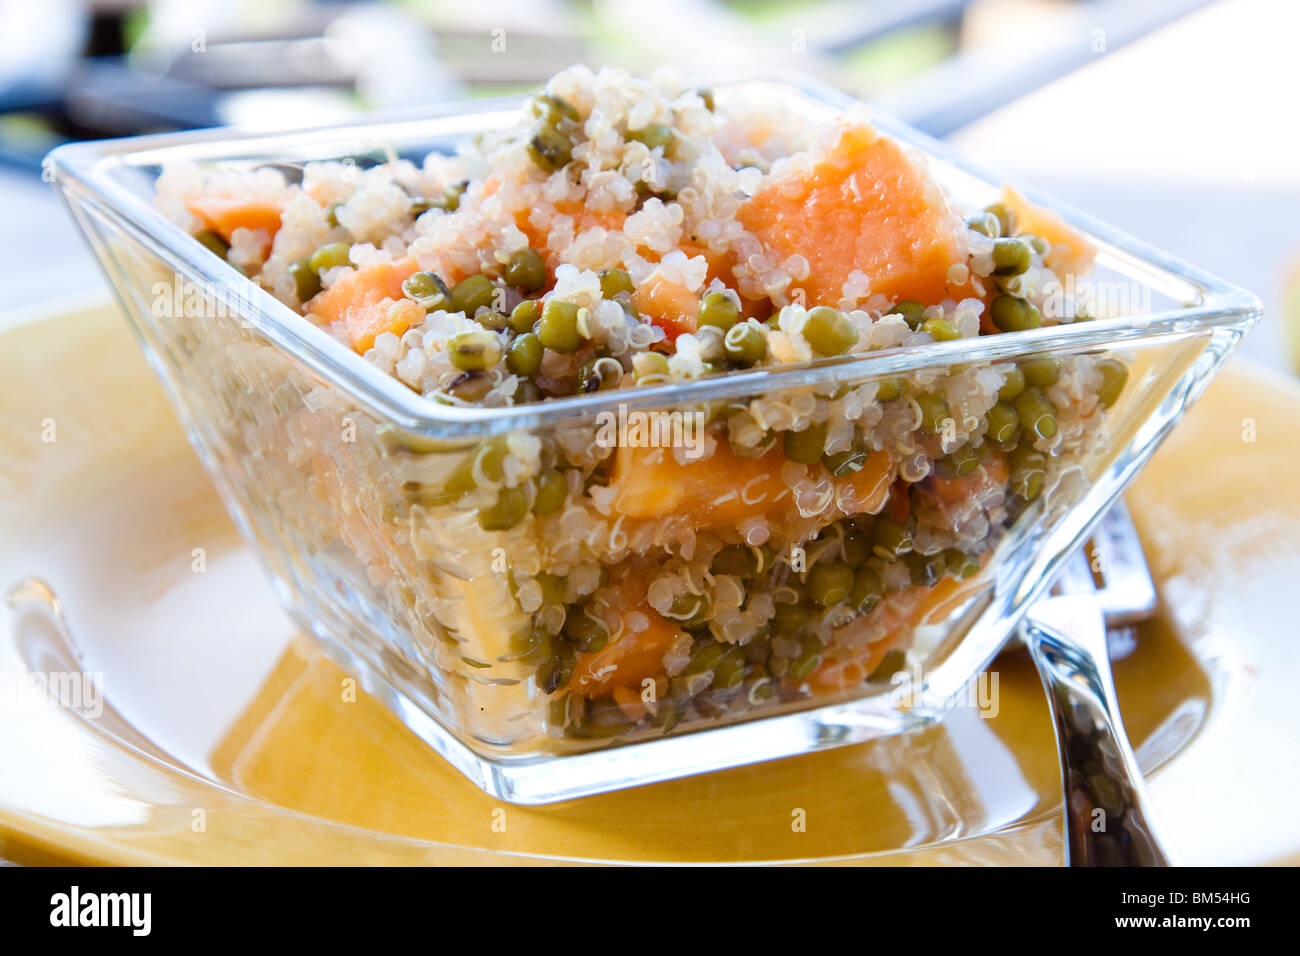 Protein rich quinoa grain salad made with sprouts and papaya. Topped with spicy dressing made with olive oil, herbs Stock Photo